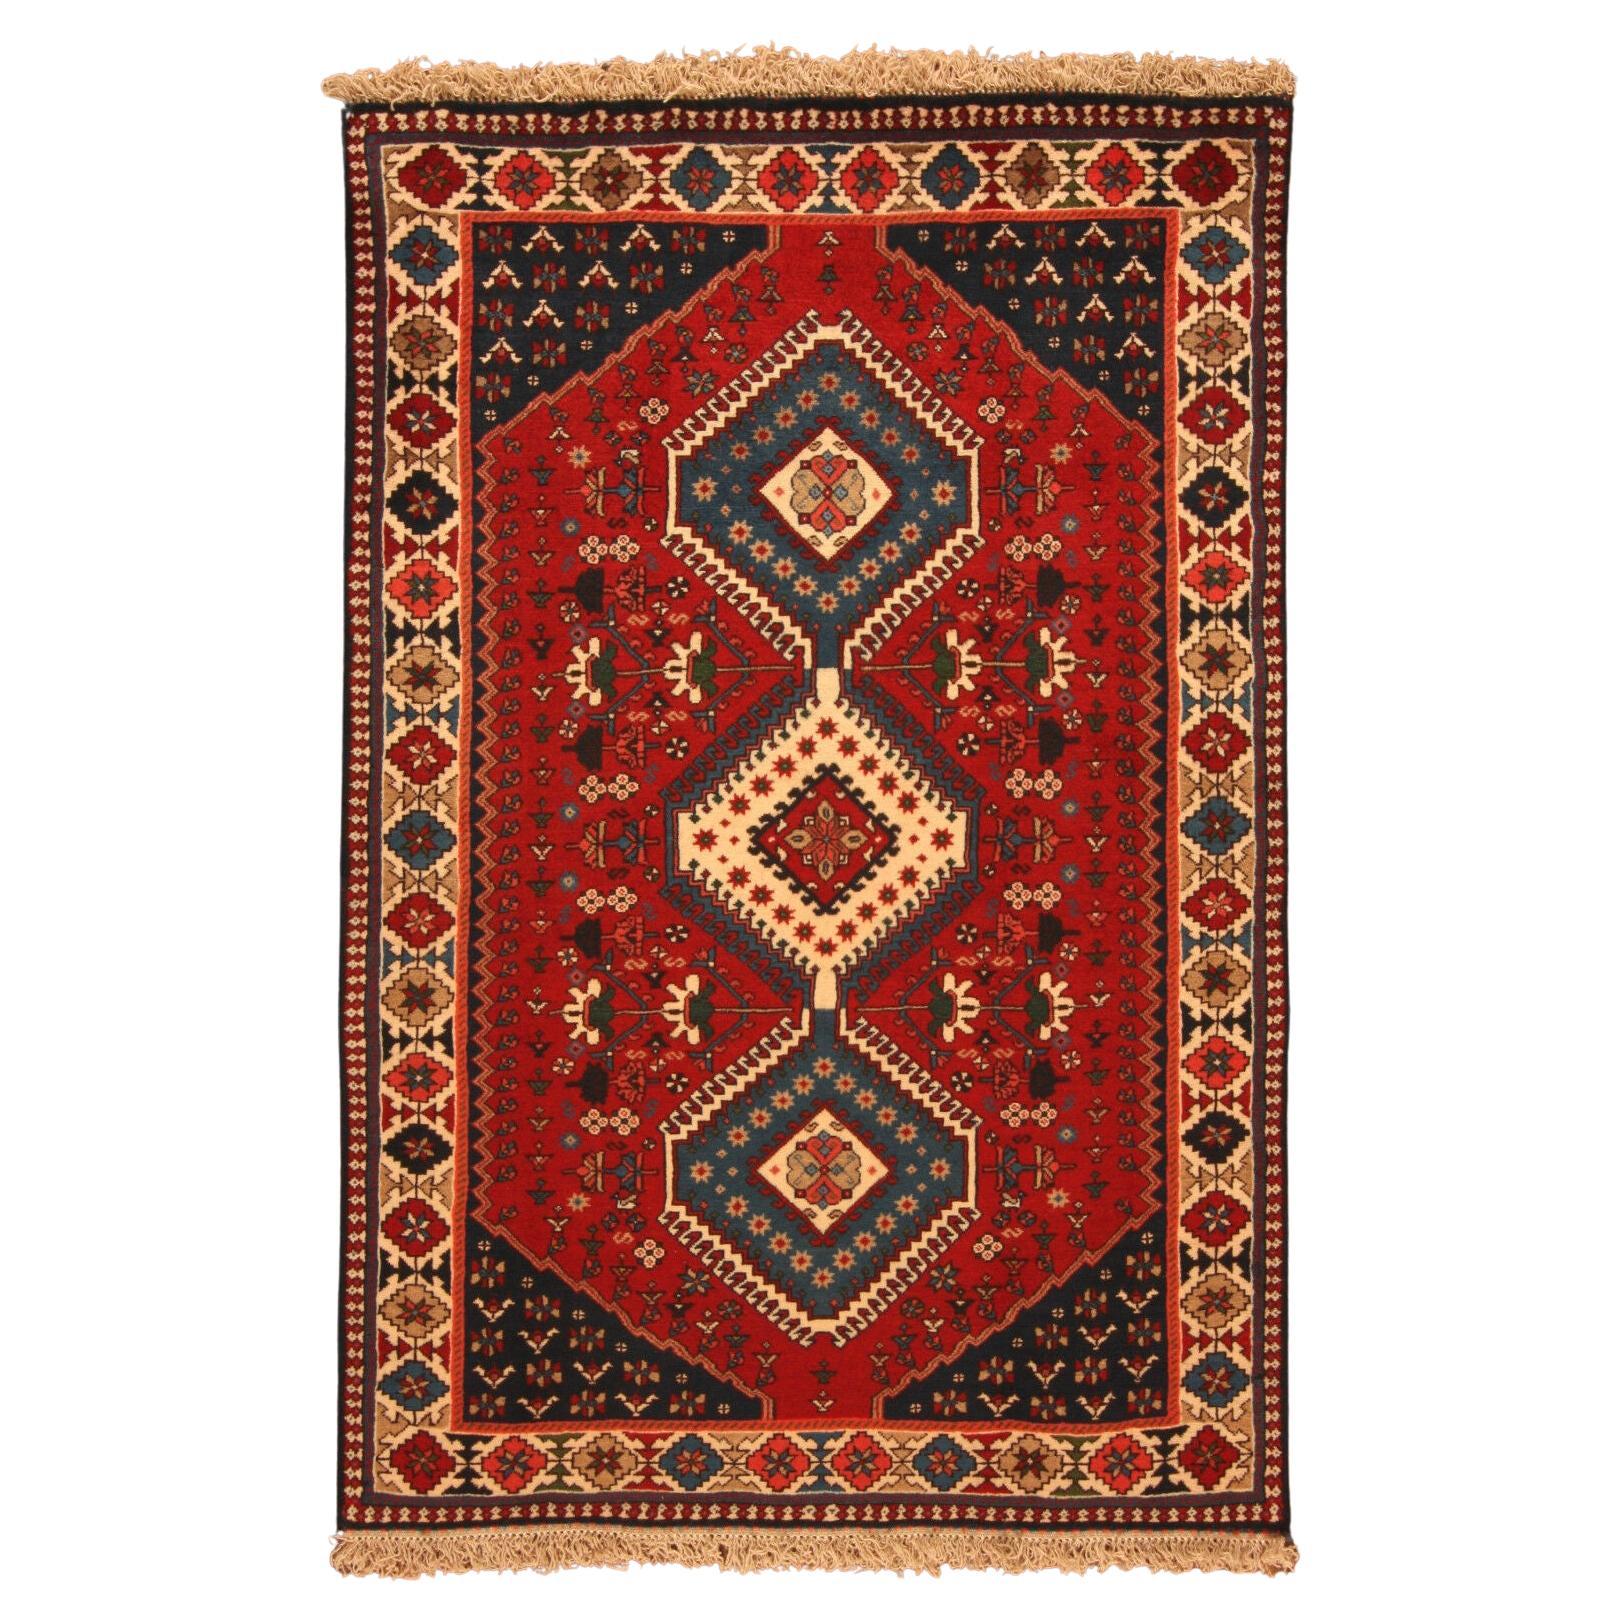 Handmade Vintage Persian Style Yalameh Rug 3.4' x 5.2', 1990s - 1T22 For Sale